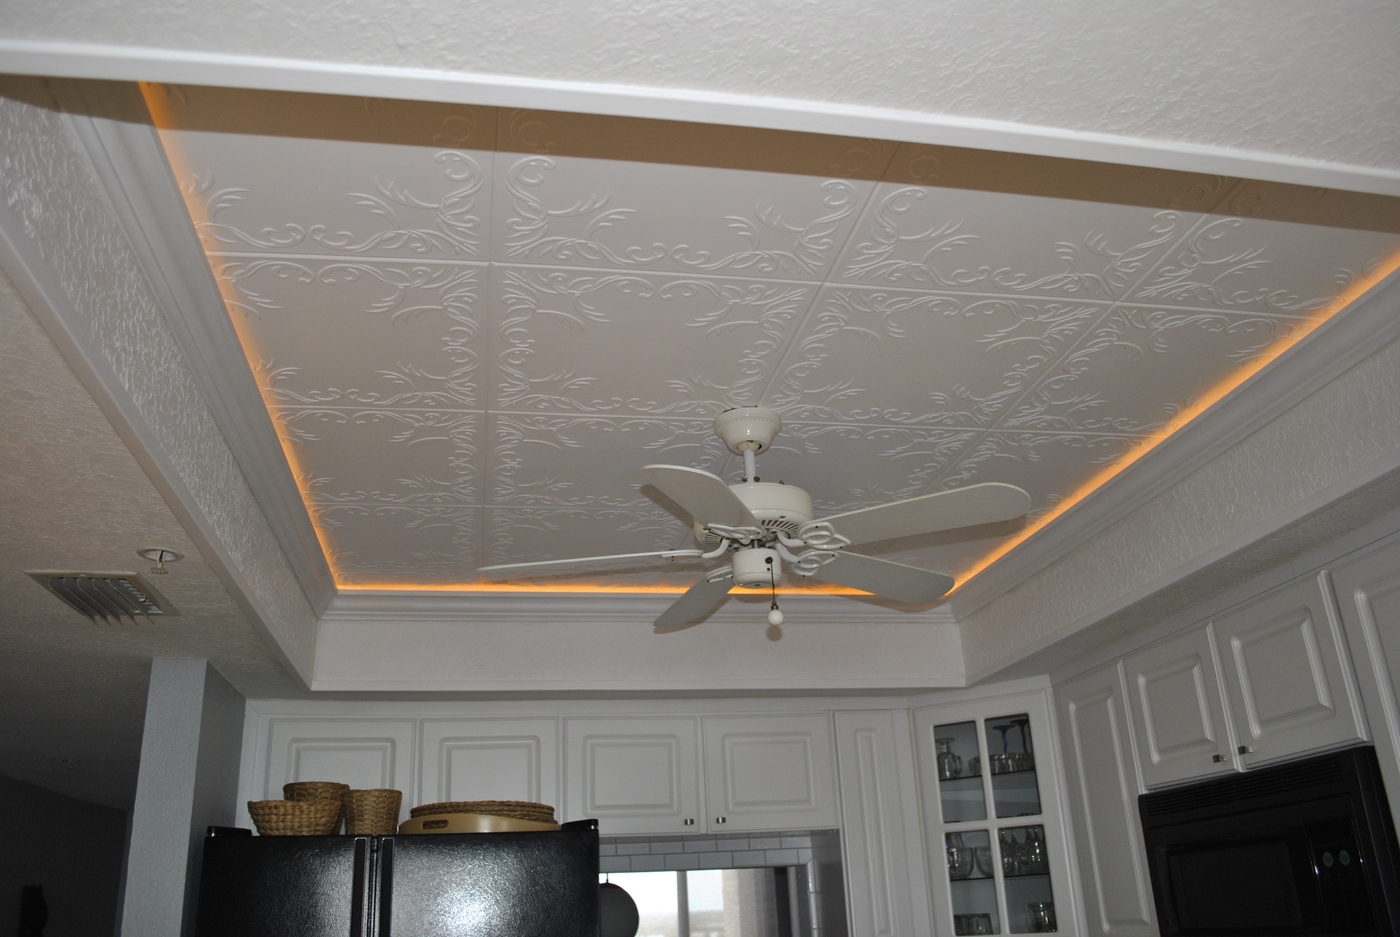 Decorative Polystyrene Ceiling Tilesantique ceilings glue up ceiling tiles and drop in grid ceiling